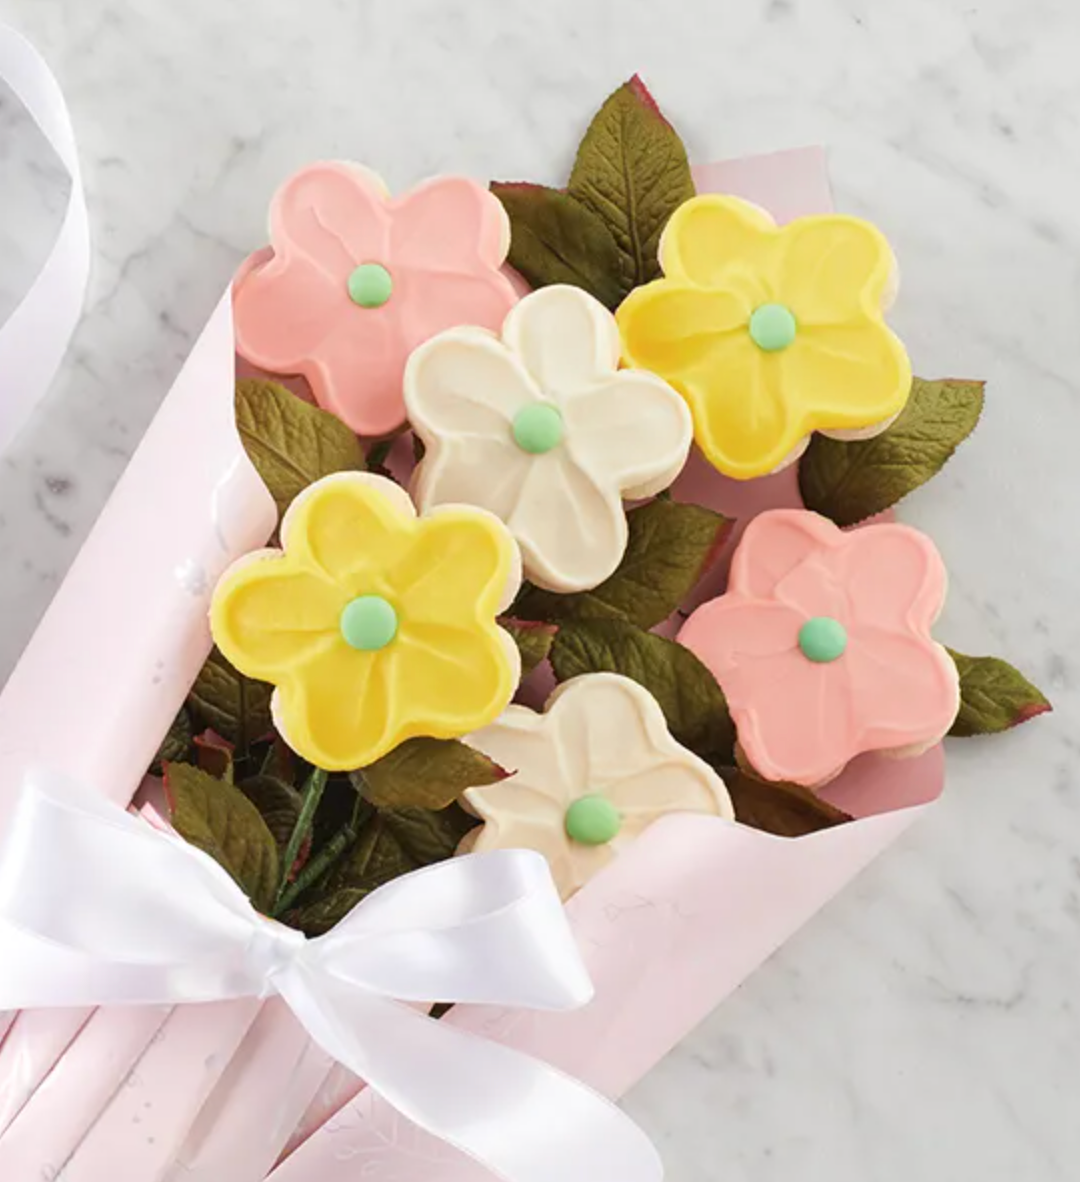 white, yellow, and pink frosted cookies made to look like flowers in a bouquet